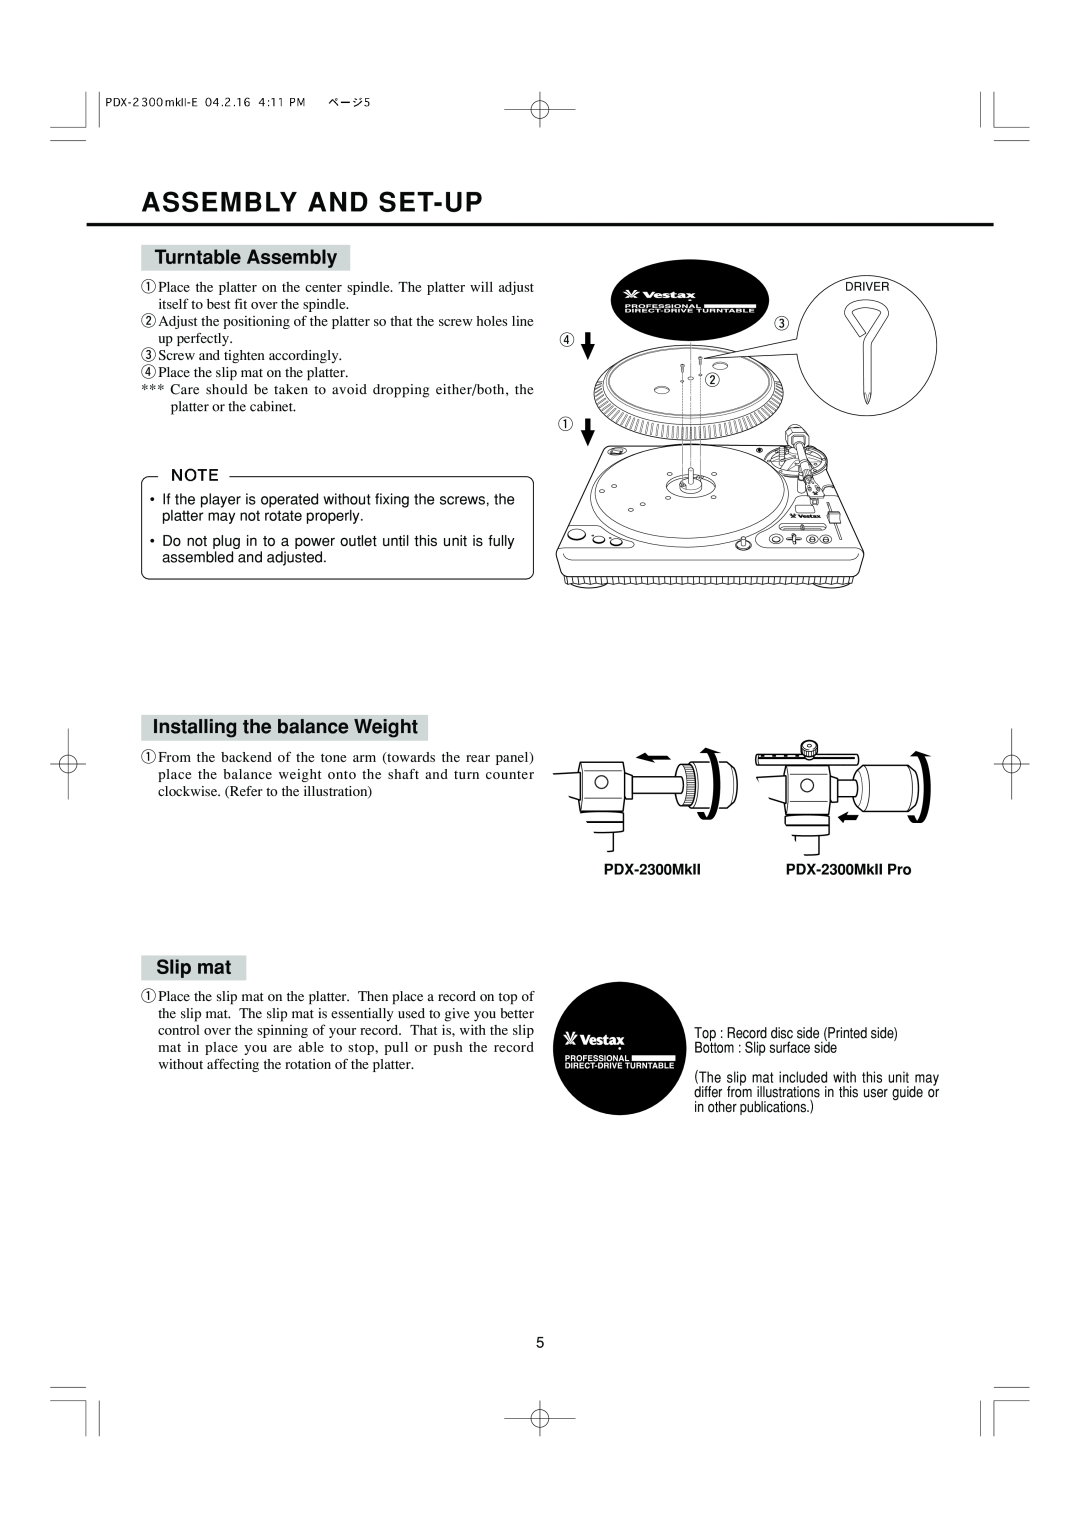 Vestax PDX-2300MkII owner manual Assembly And Set-Up, Turntable Assembly, Installing the balance Weight, Slip mat 